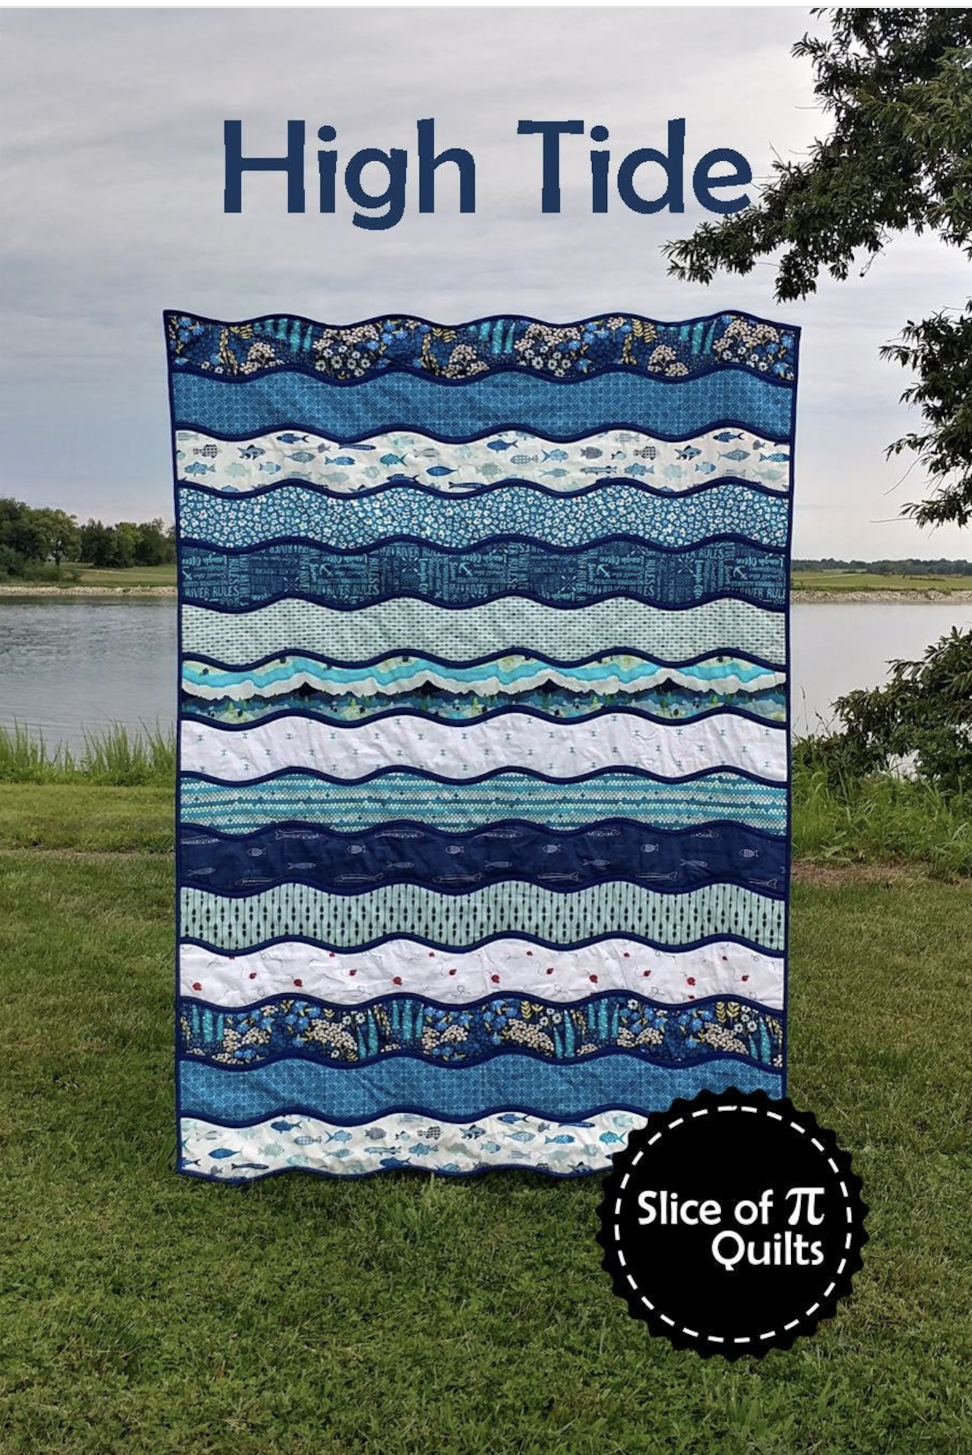 High Tide Quilt Pattern by Slice of Pi Quilts